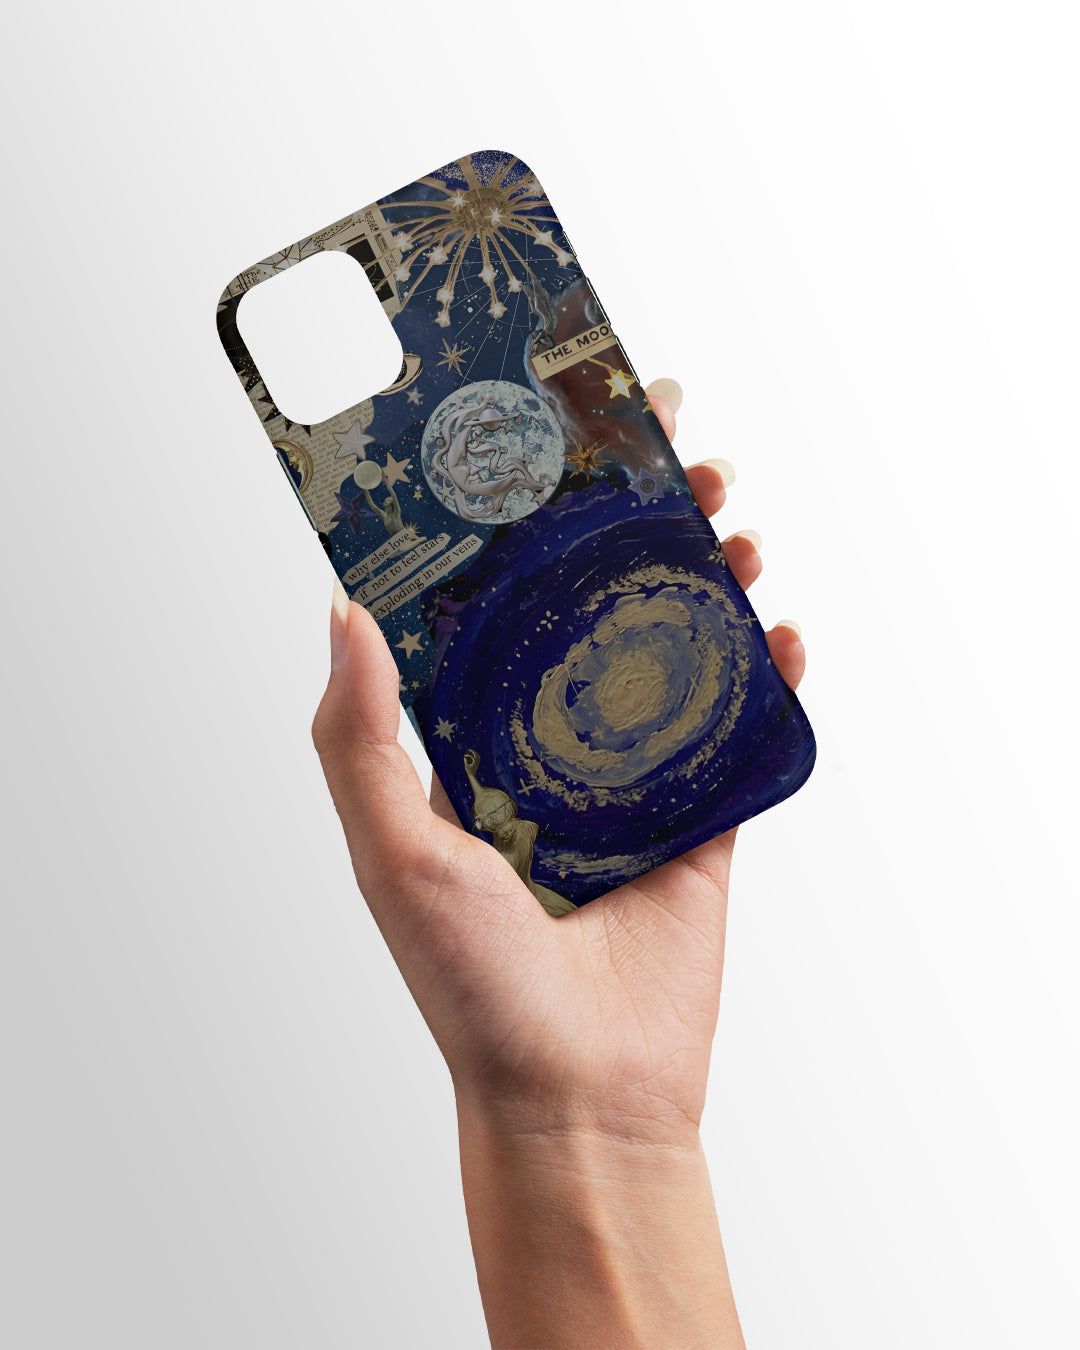 THE MOON CASE